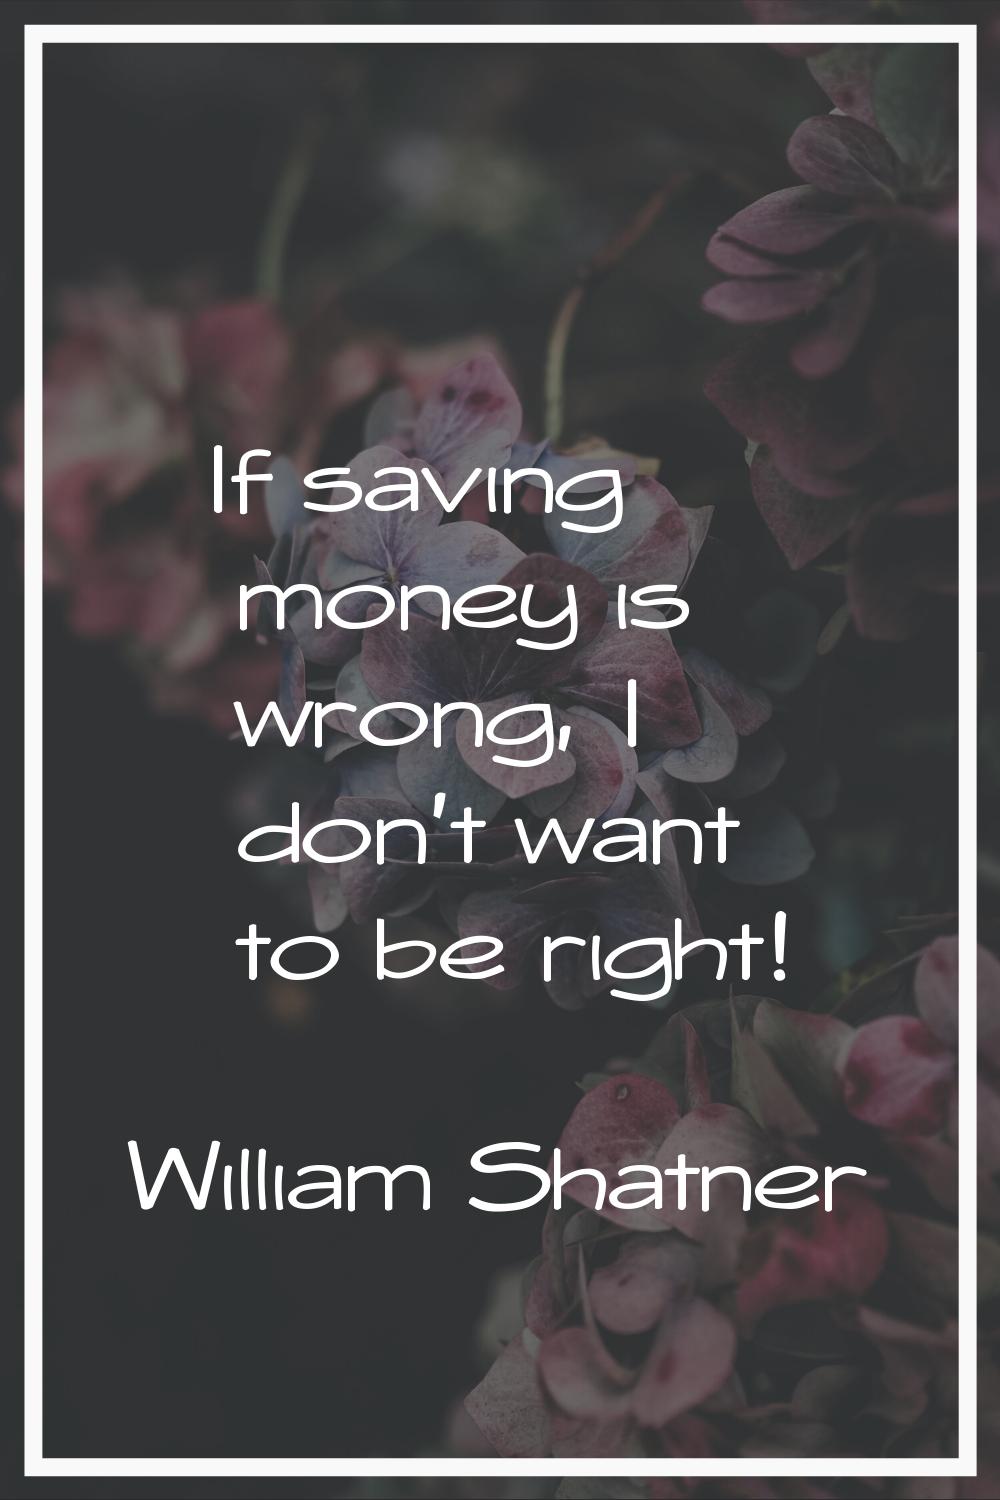 If saving money is wrong, I don't want to be right!